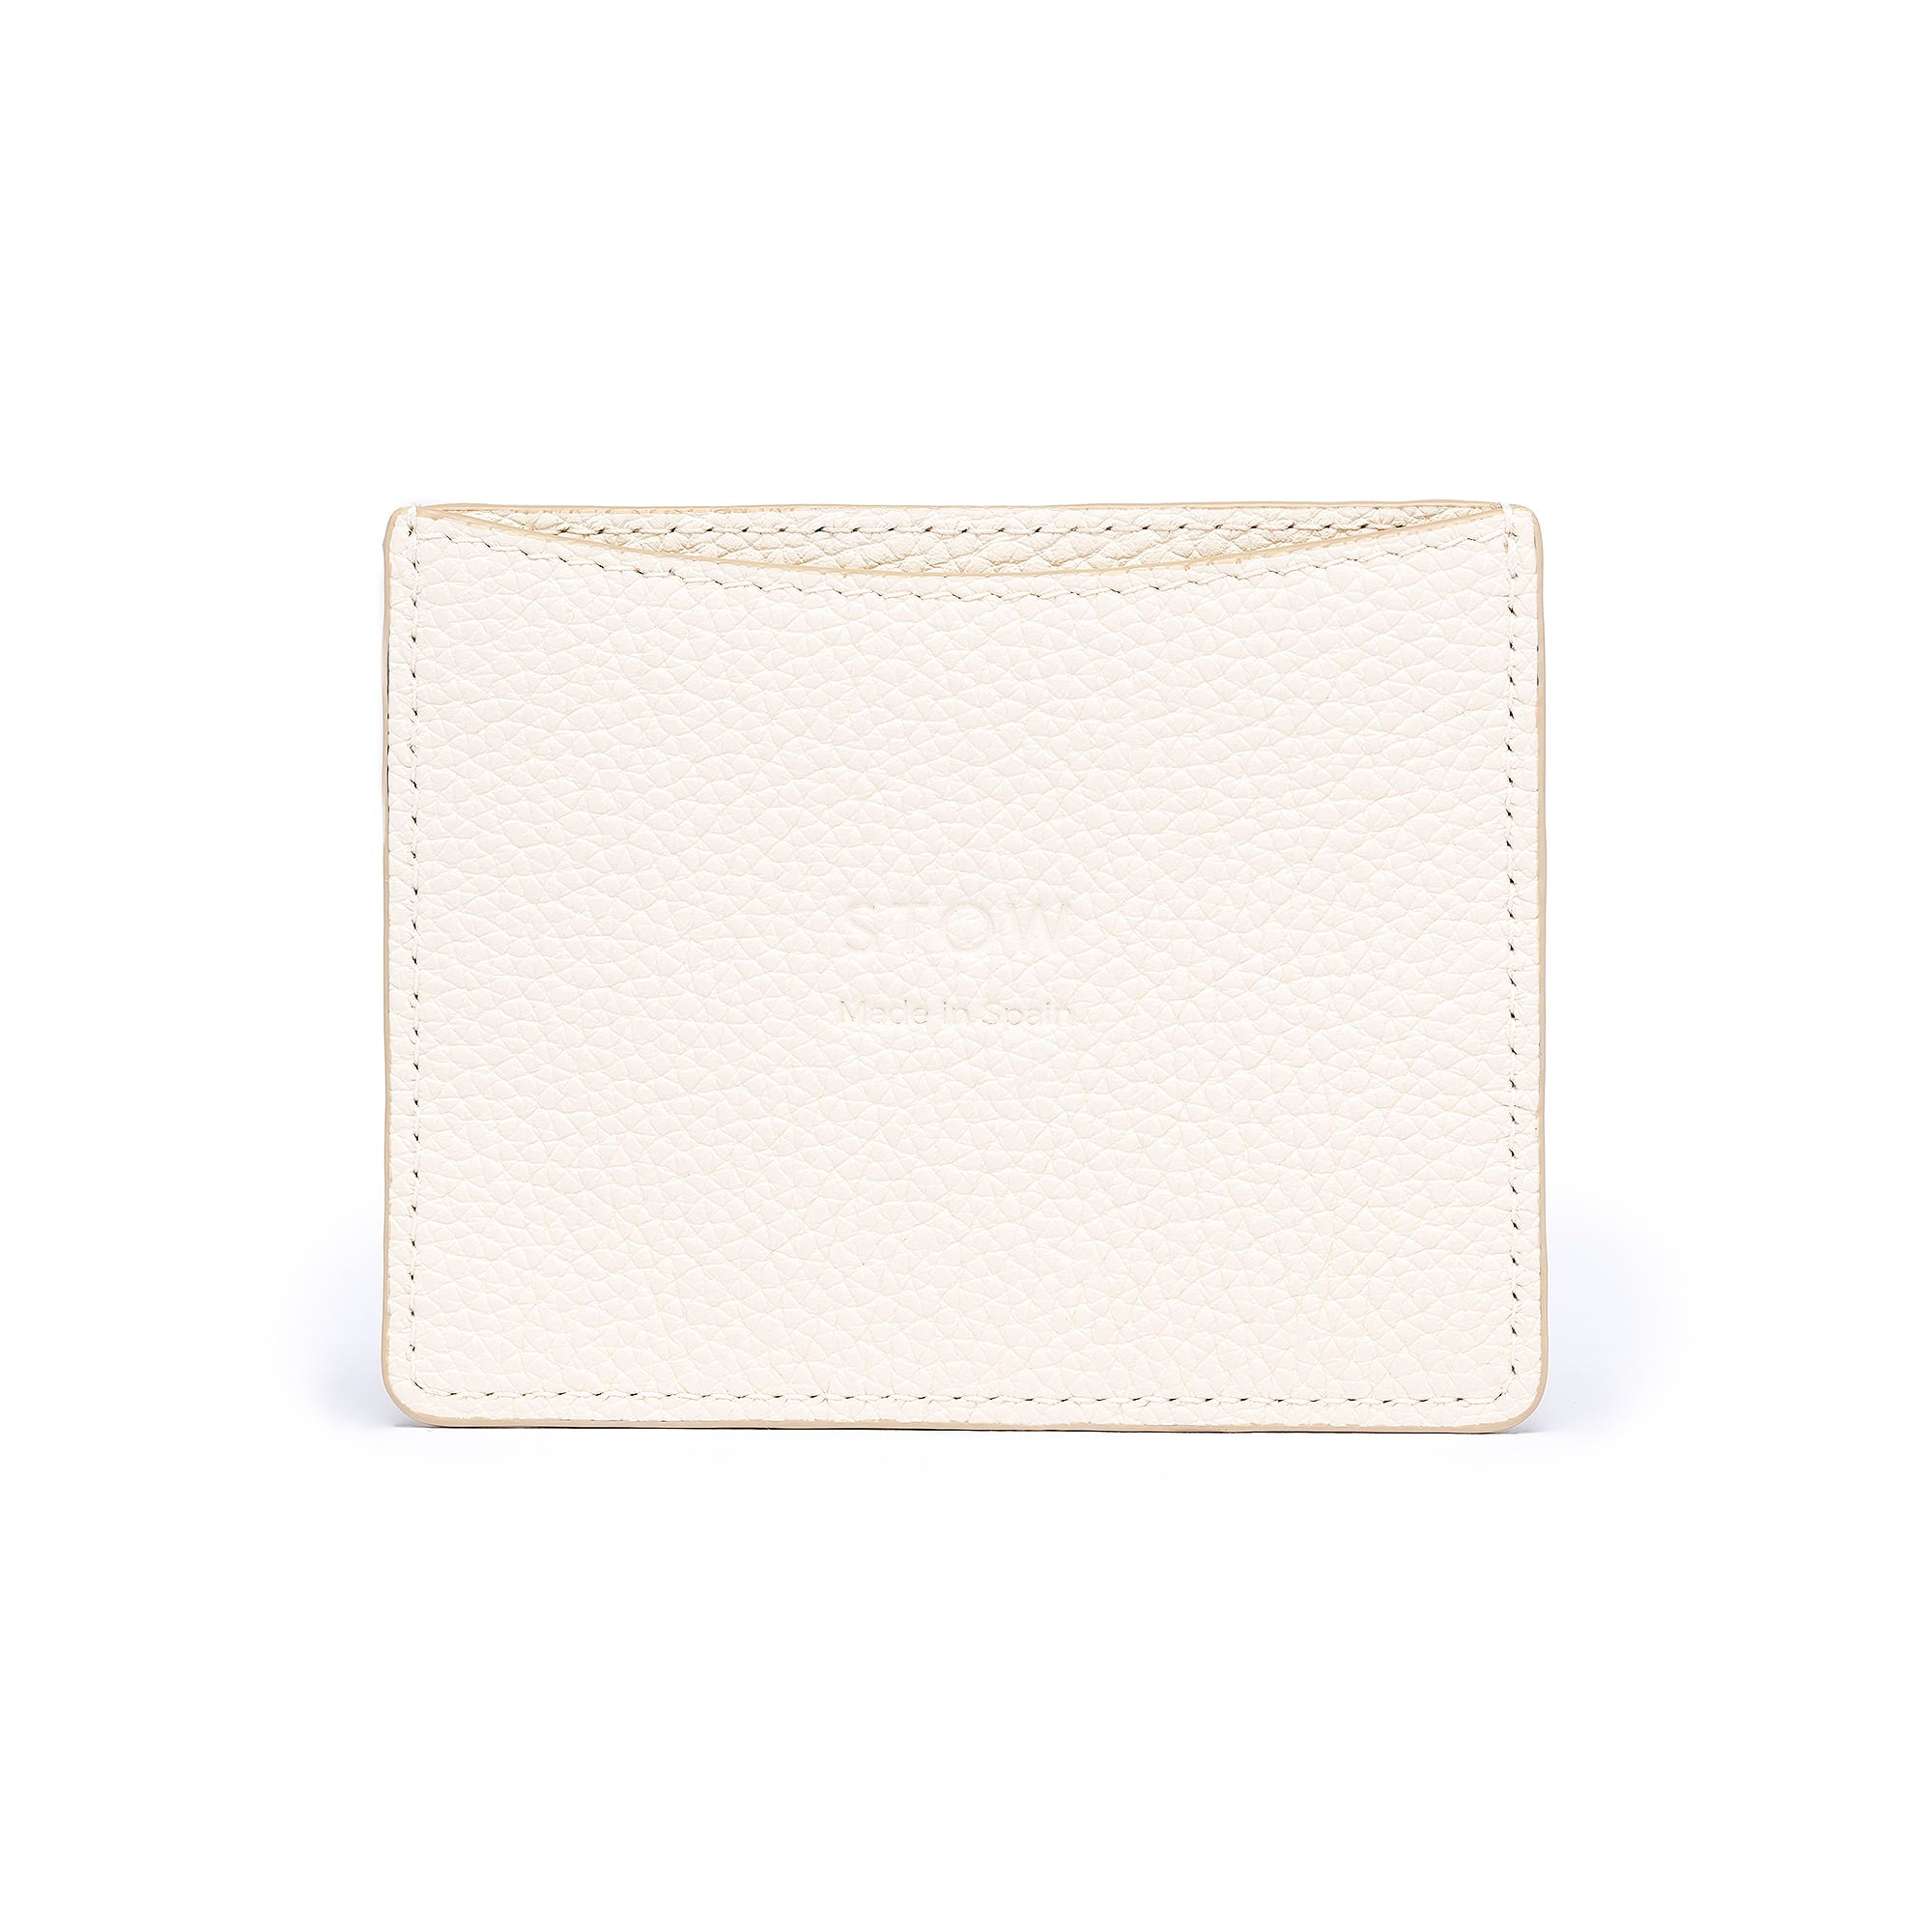 STOW Leather Cardholder in Spring Moon colour.